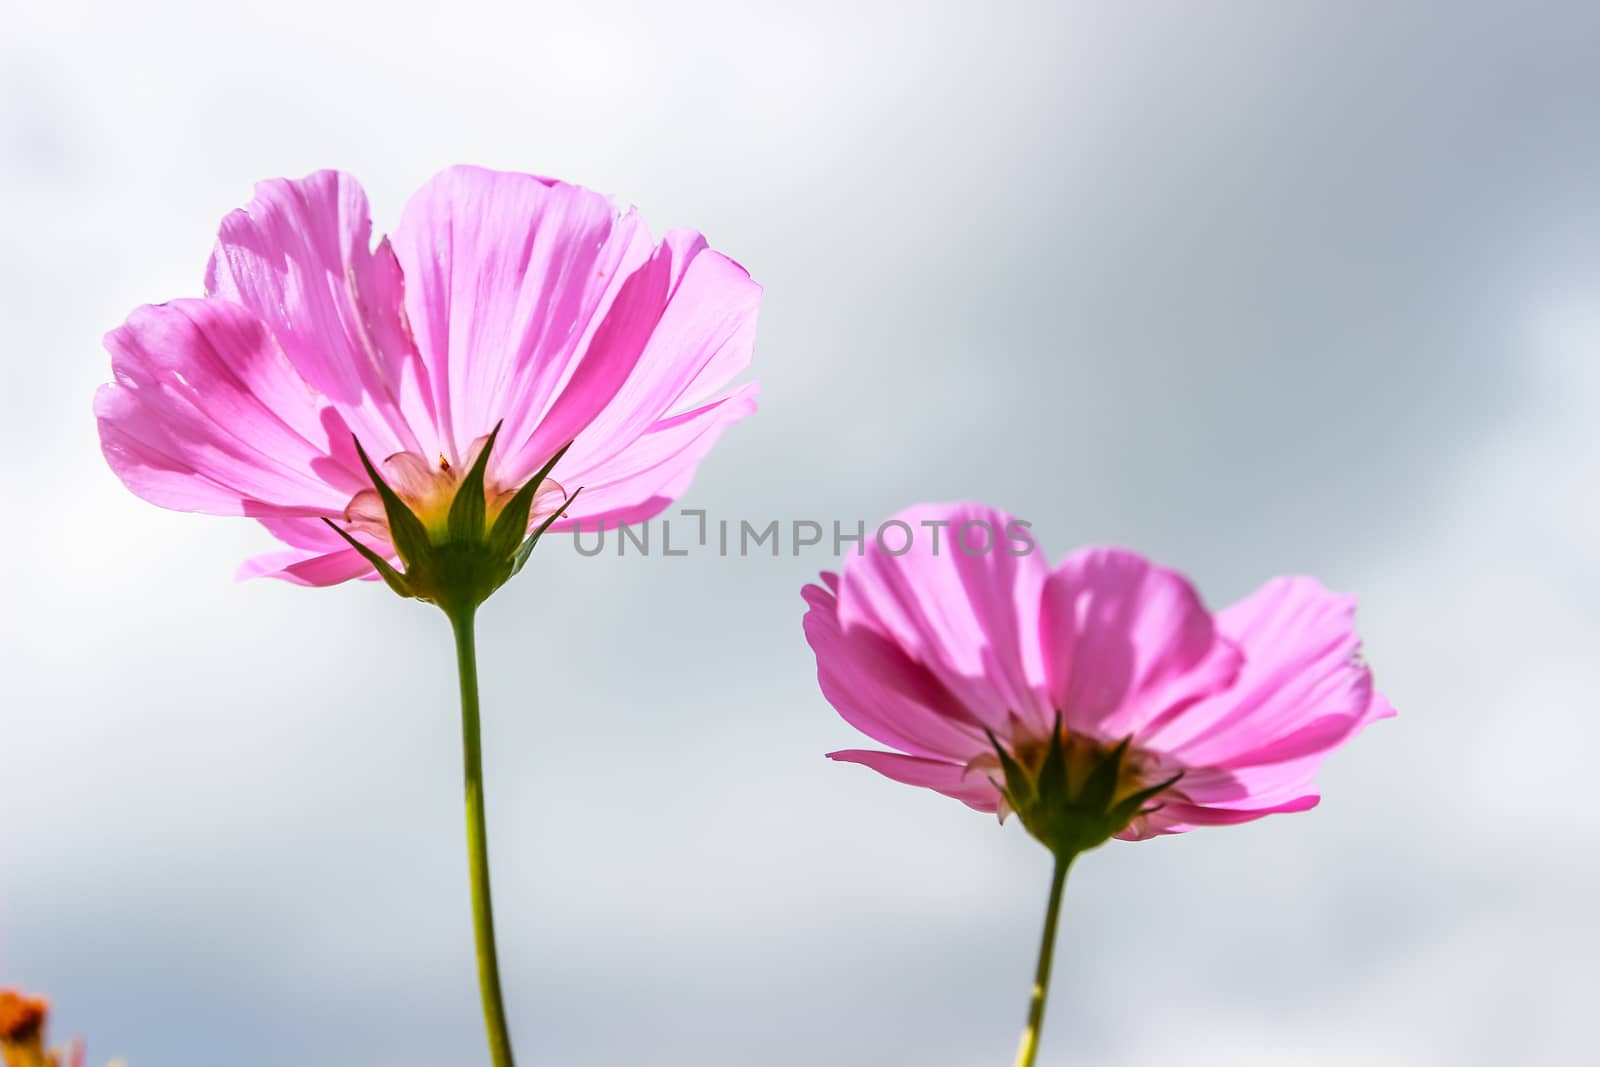 Colorful cosmos flower blooming in the field with blue sky, Soft focus.